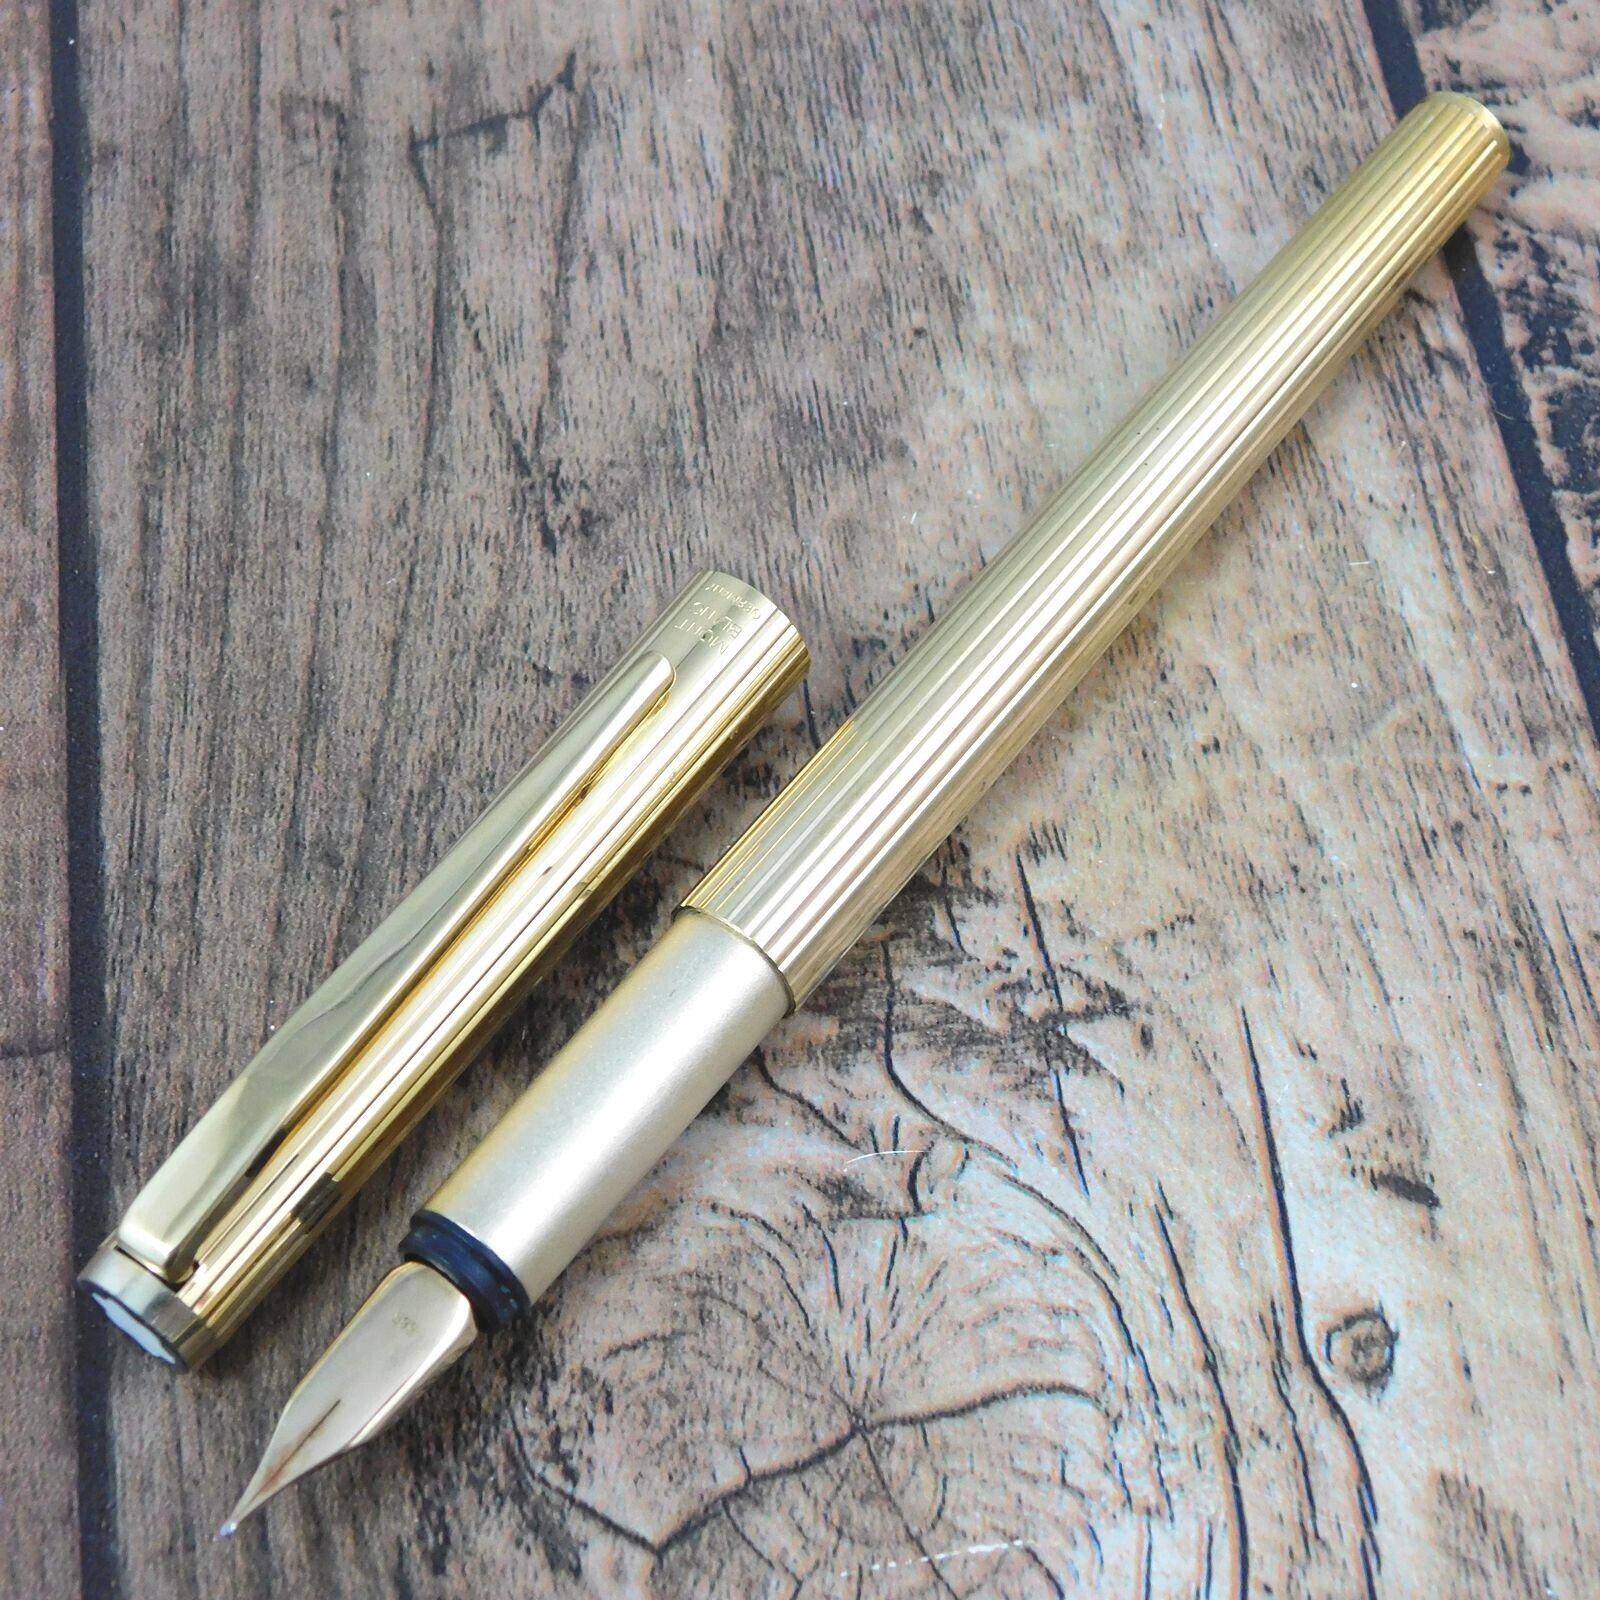 MONTBLANC NOBLESSE FOUNTAIN PEN VINTAGE GOLD GERMANY A174-1